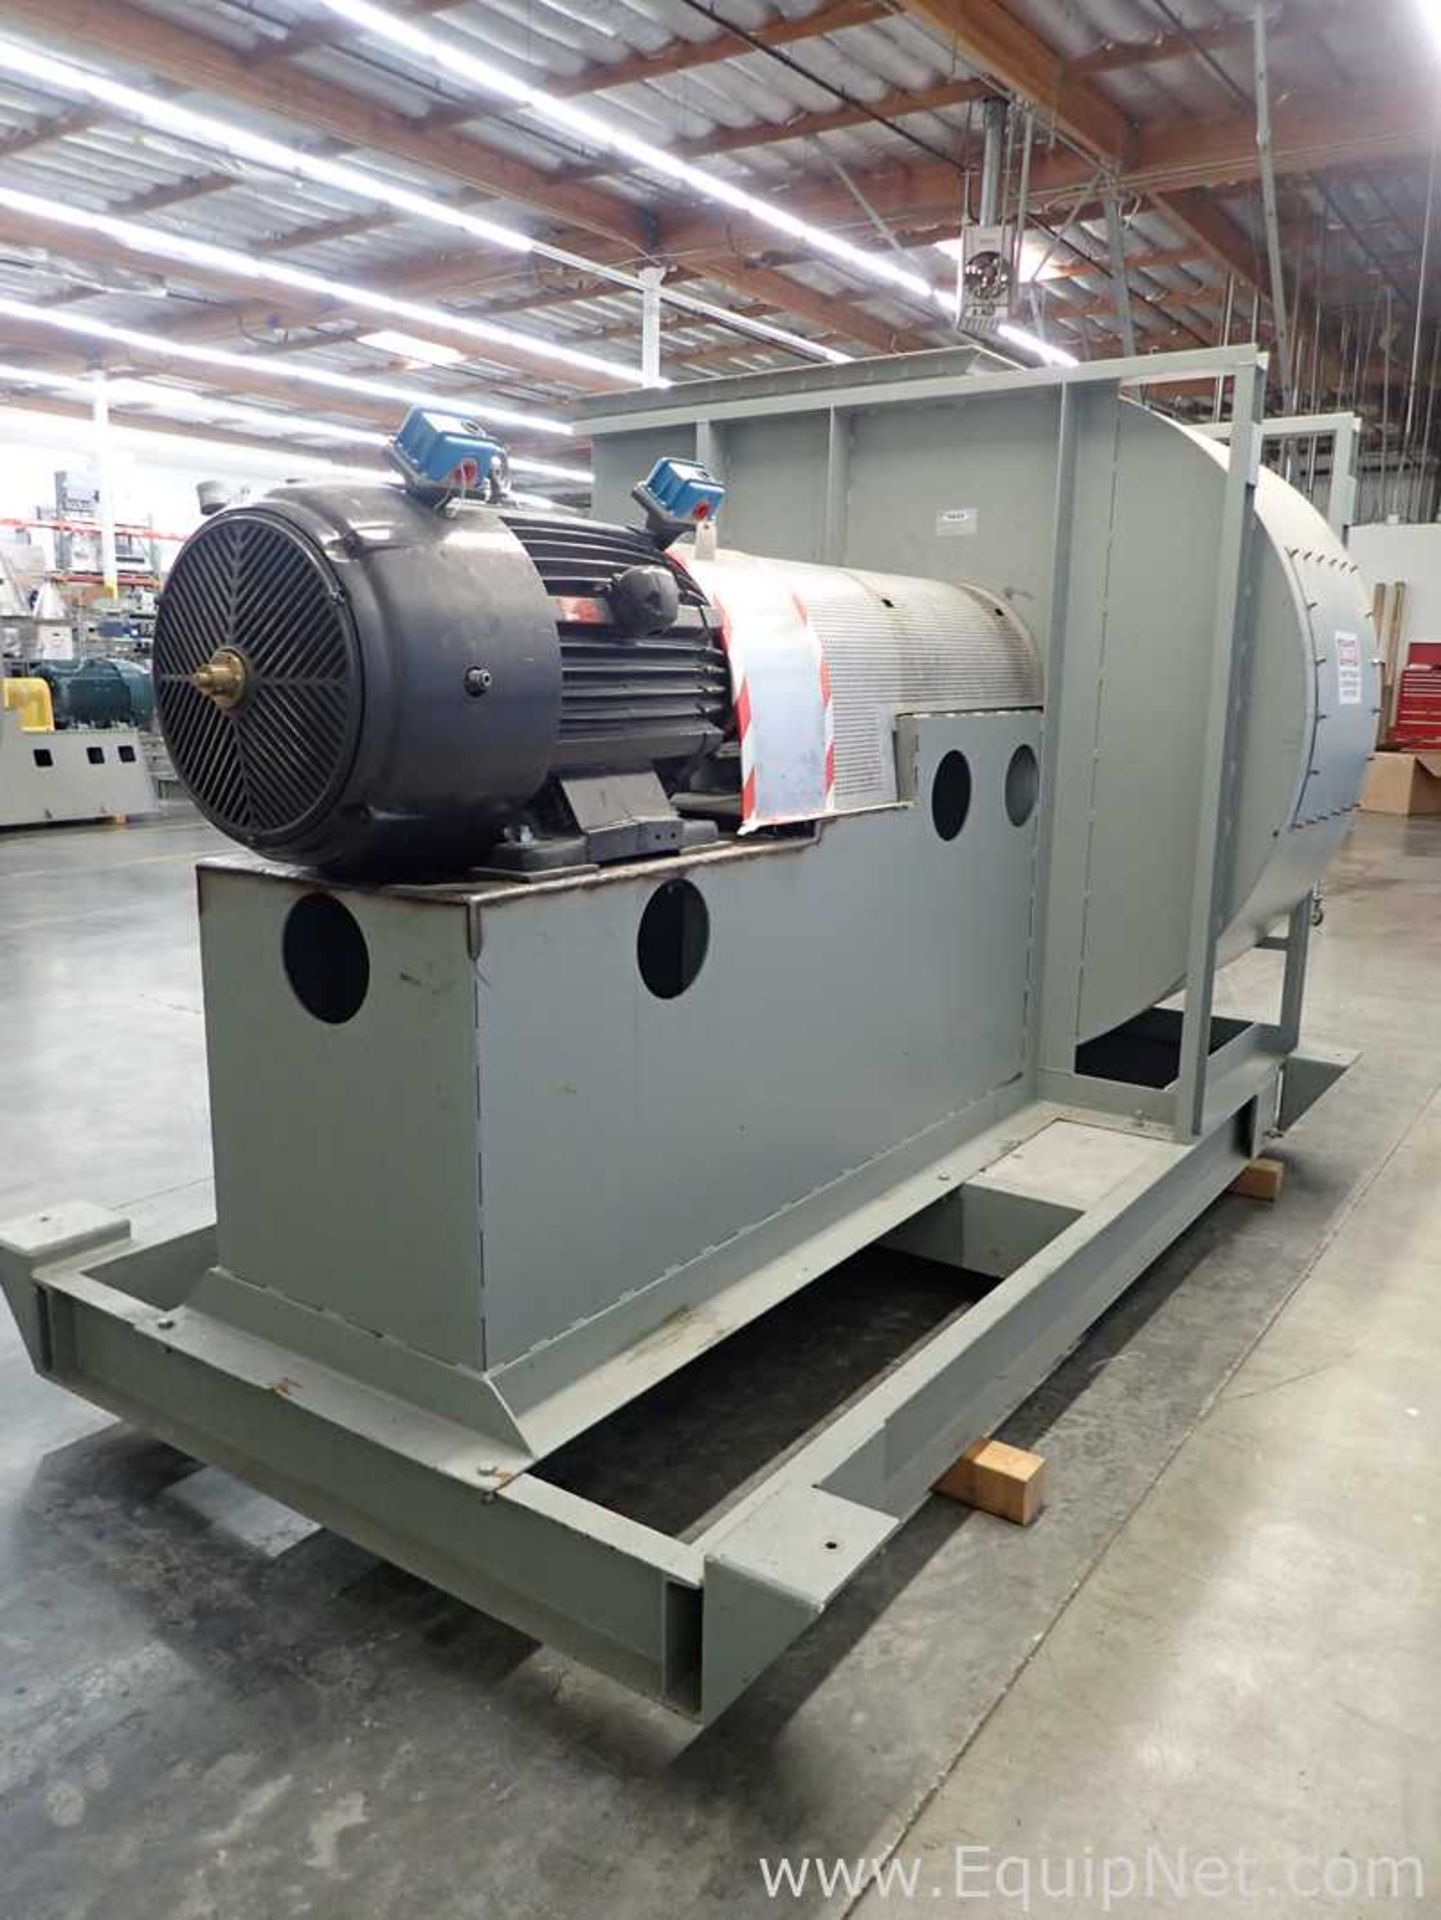 Pace Company CL 44ARRG8 General Air Handler Fan and Motor - Image 13 of 47